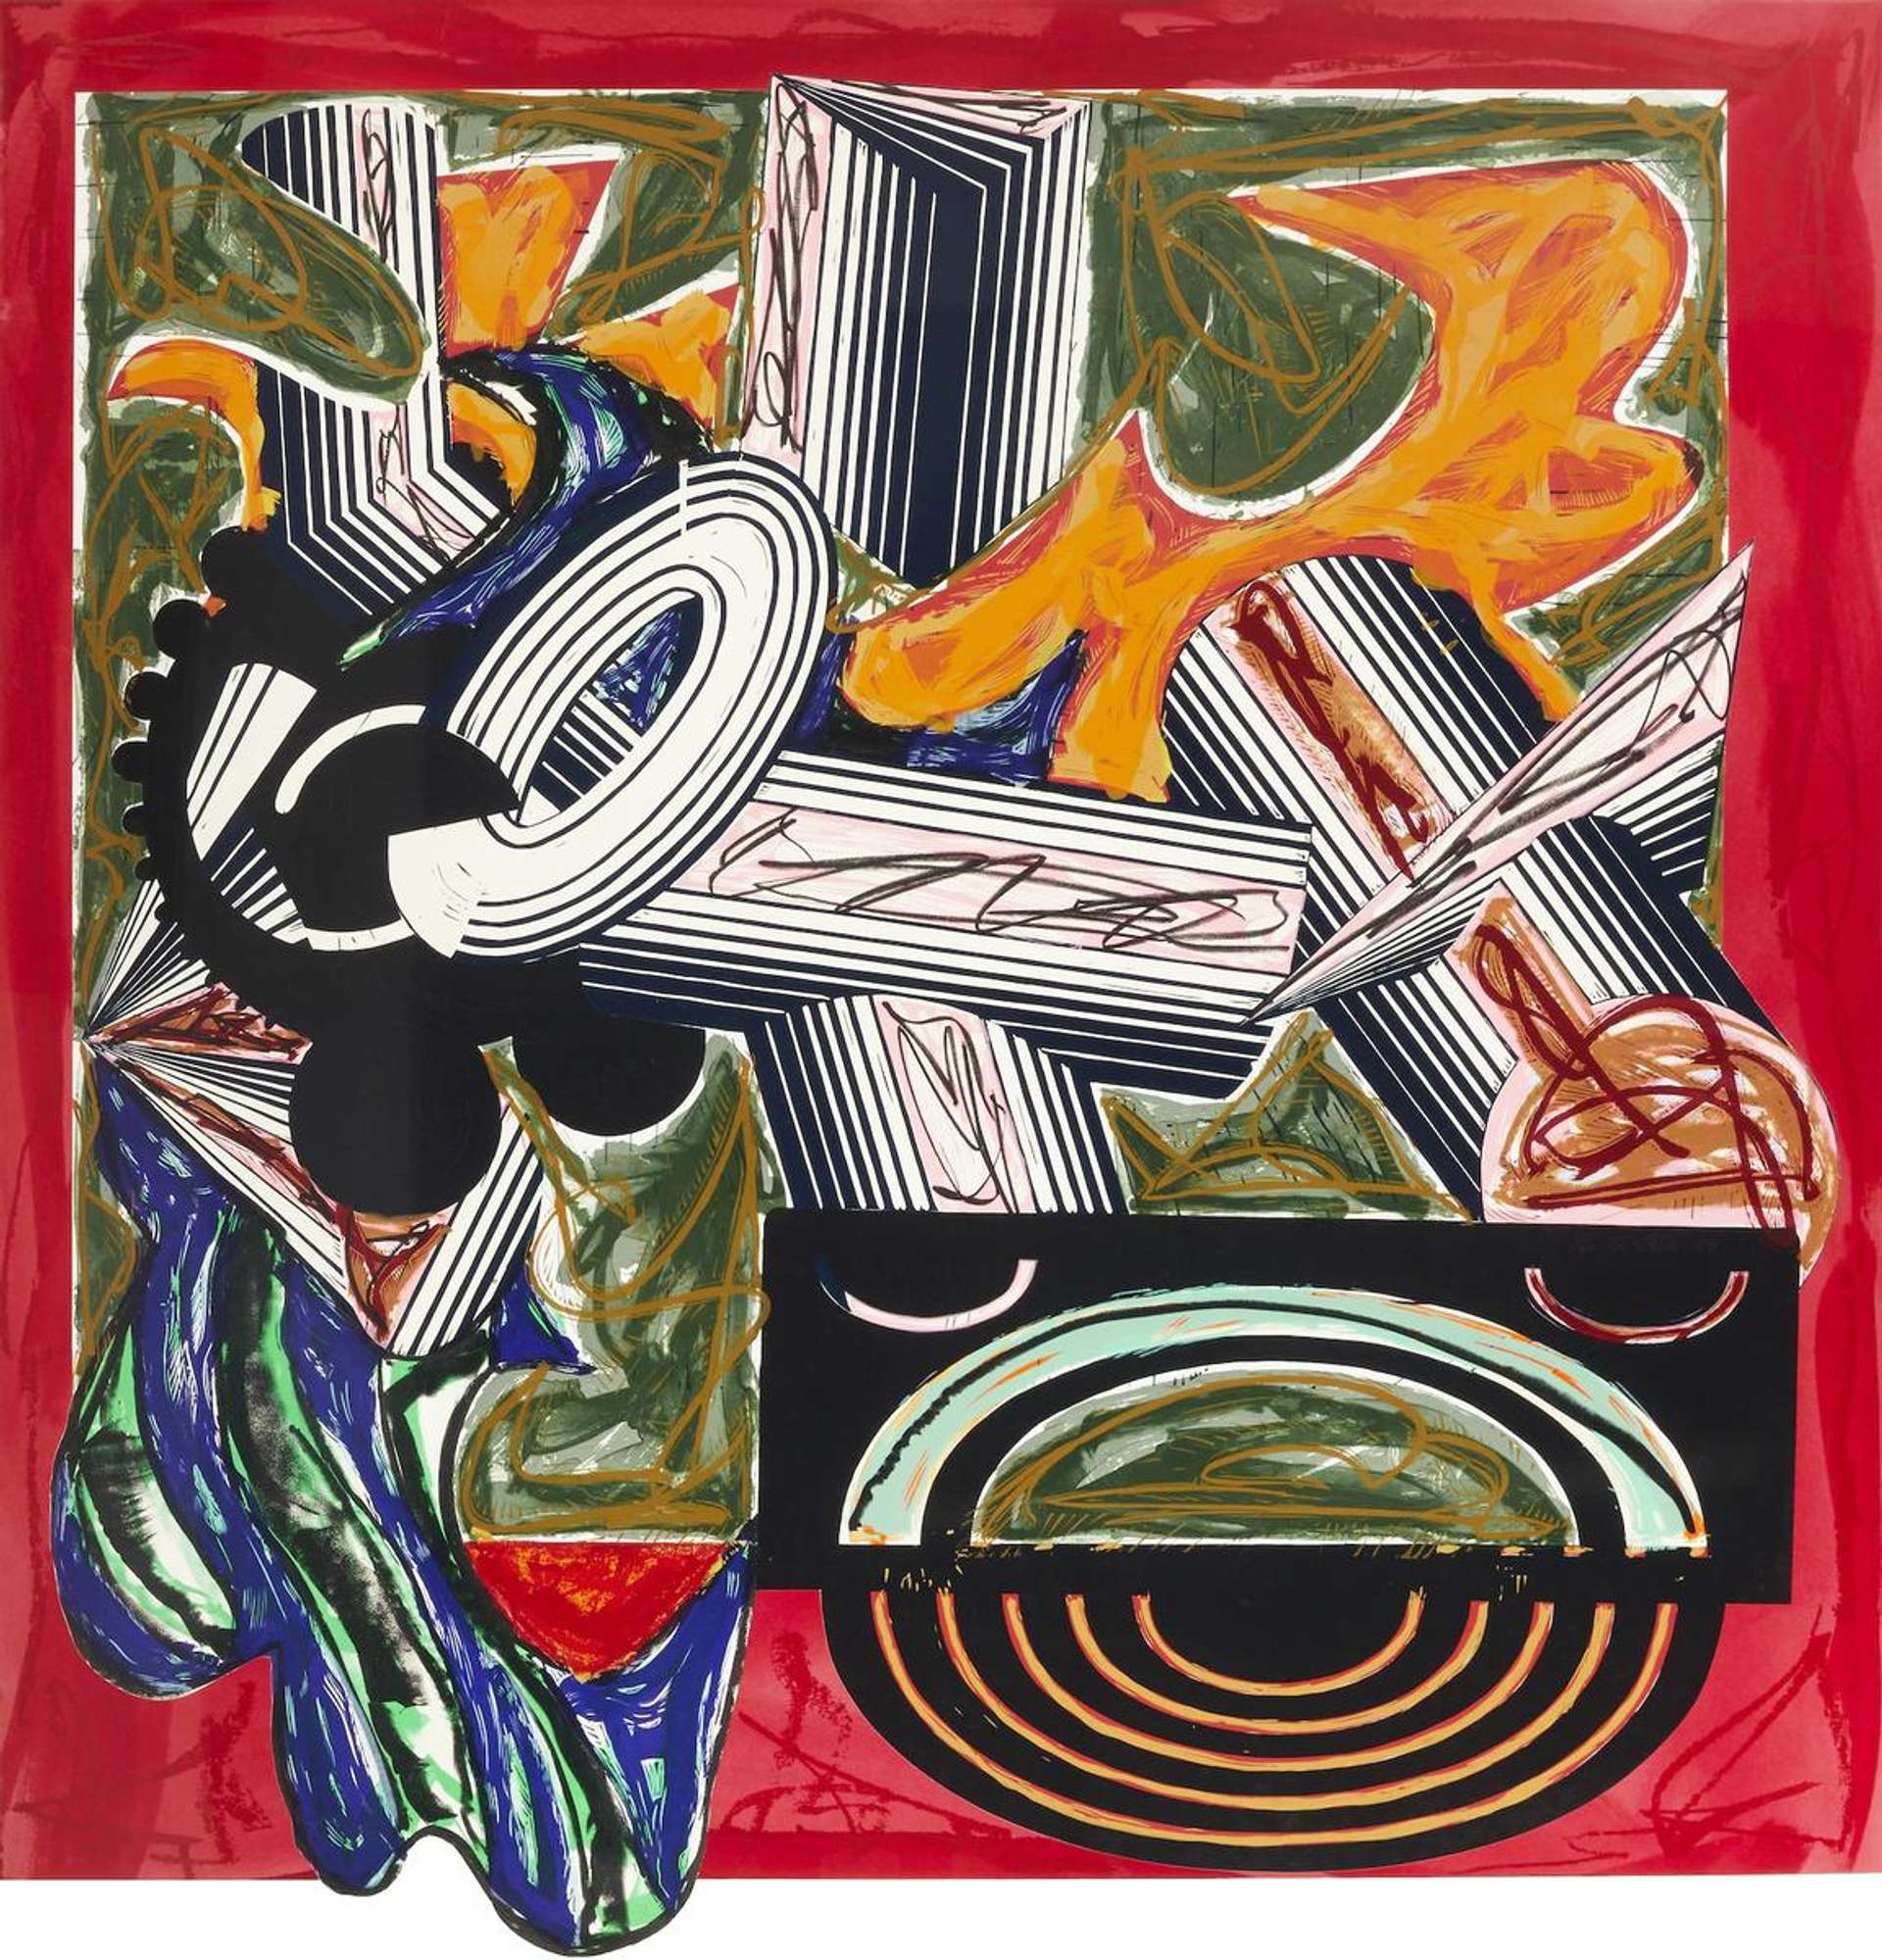 Frank Stella: Then Came A Dog And Bit The Cat - Signed Print